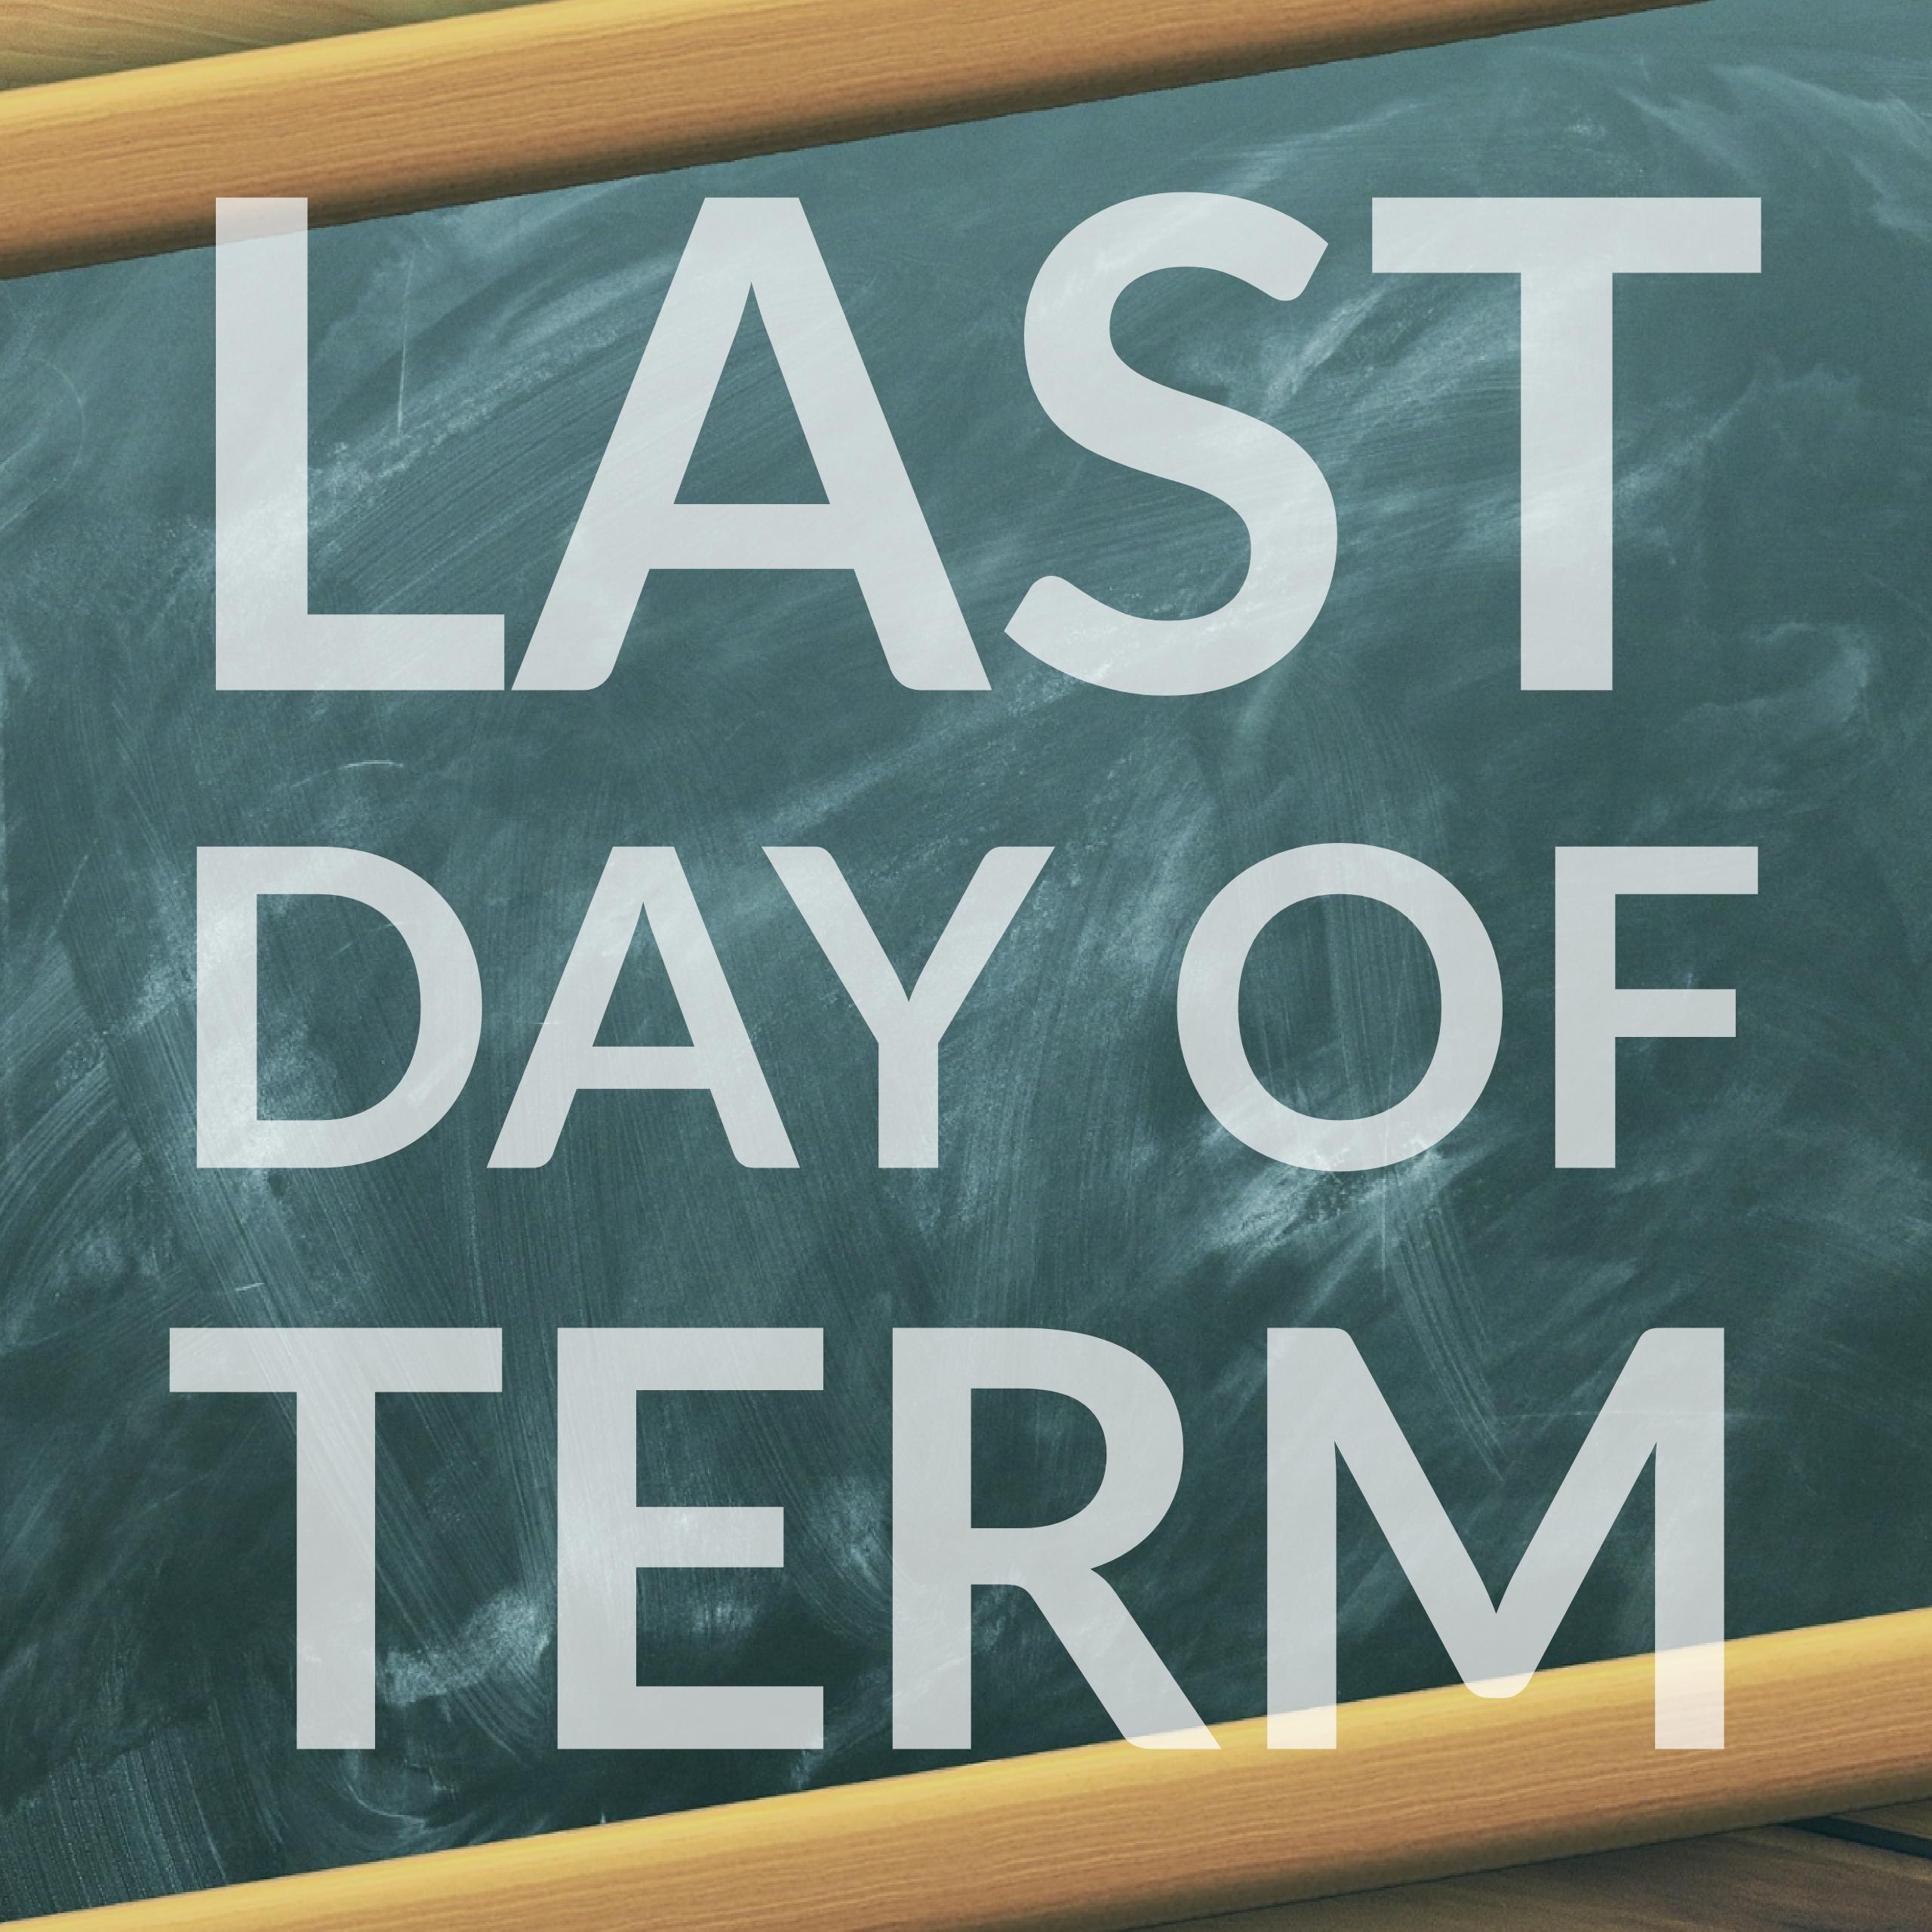 Image result for last day of term